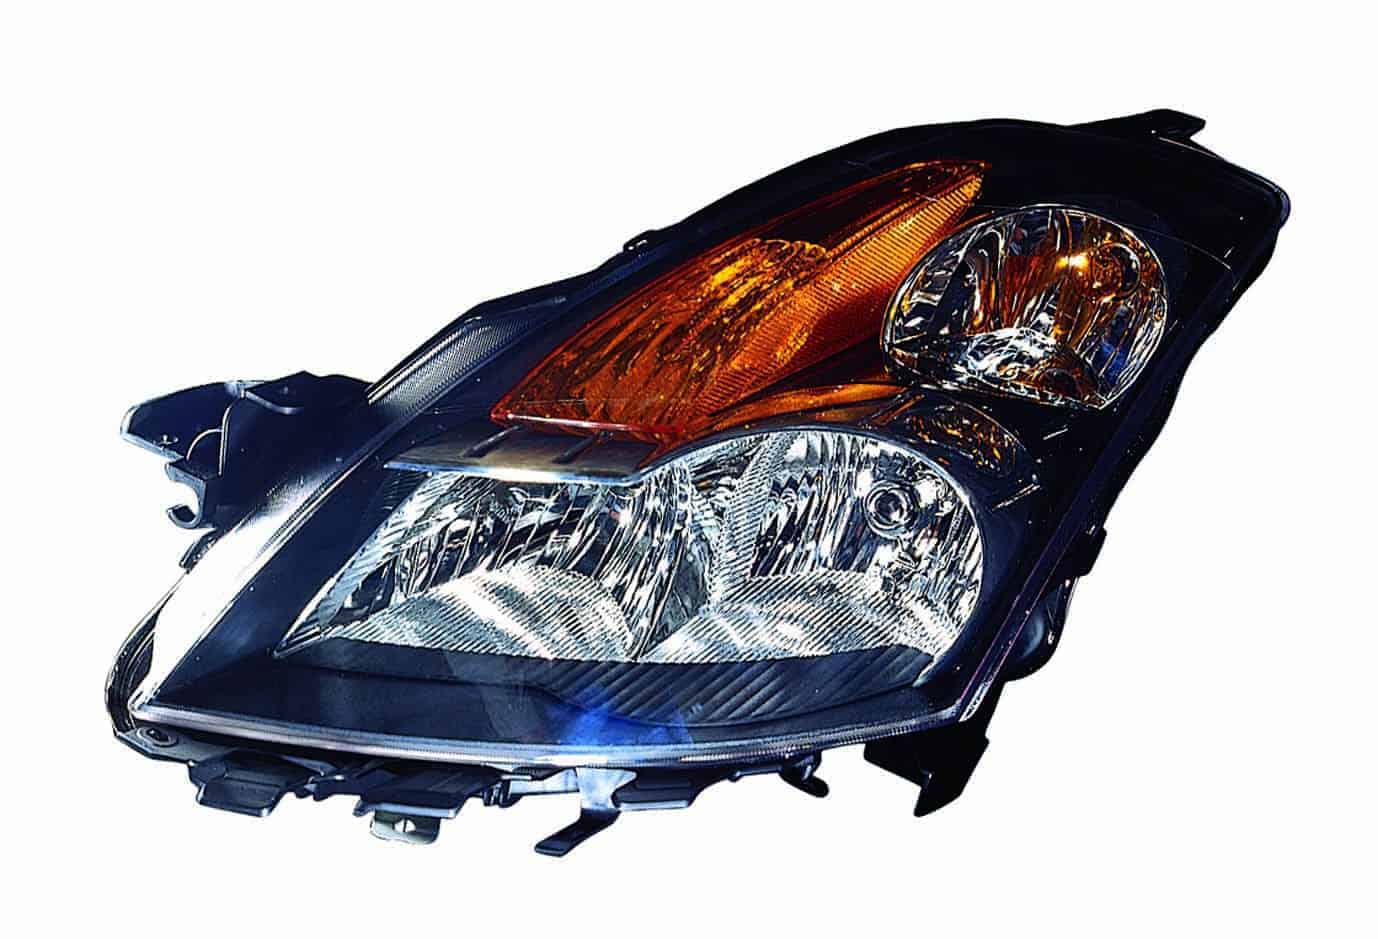 NI2502166 Front Light Headlight Assembly Composite